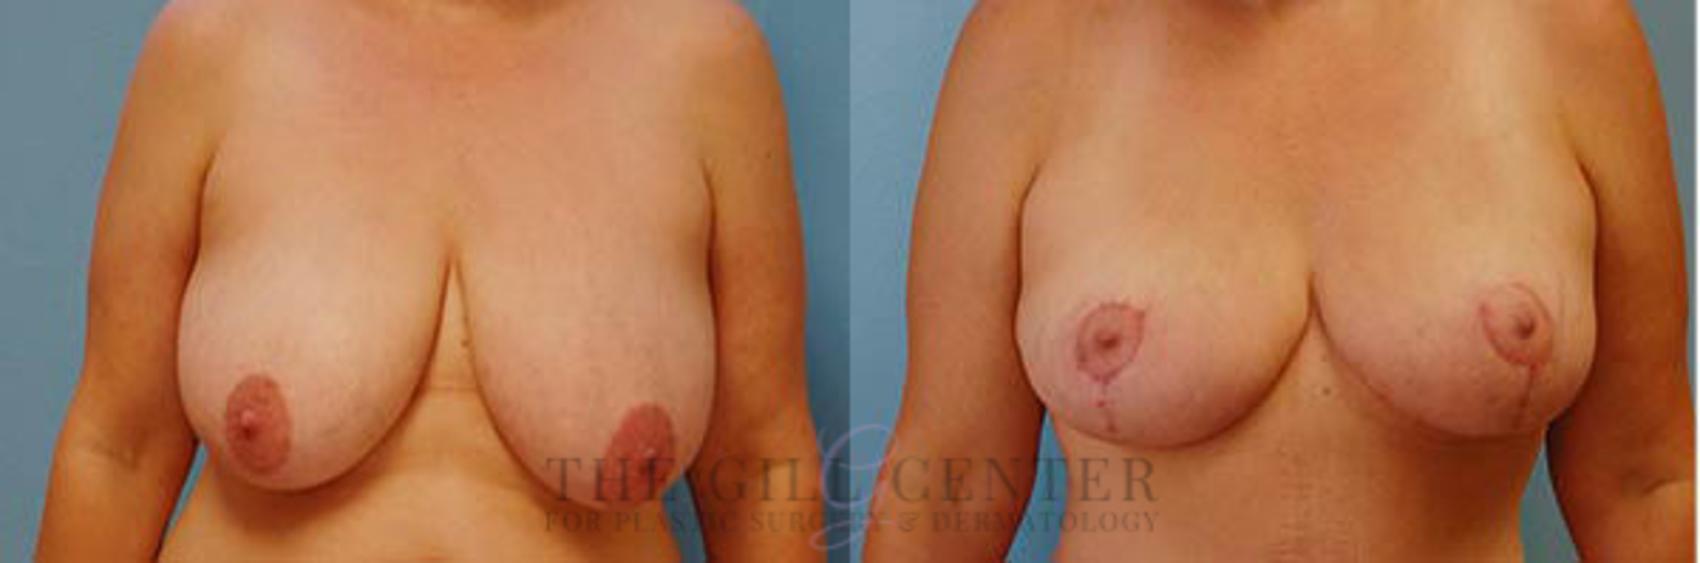 Breast Lift Case 82 Before & After Front | The Woodlands, TX | The Gill Center for Plastic Surgery and Dermatology